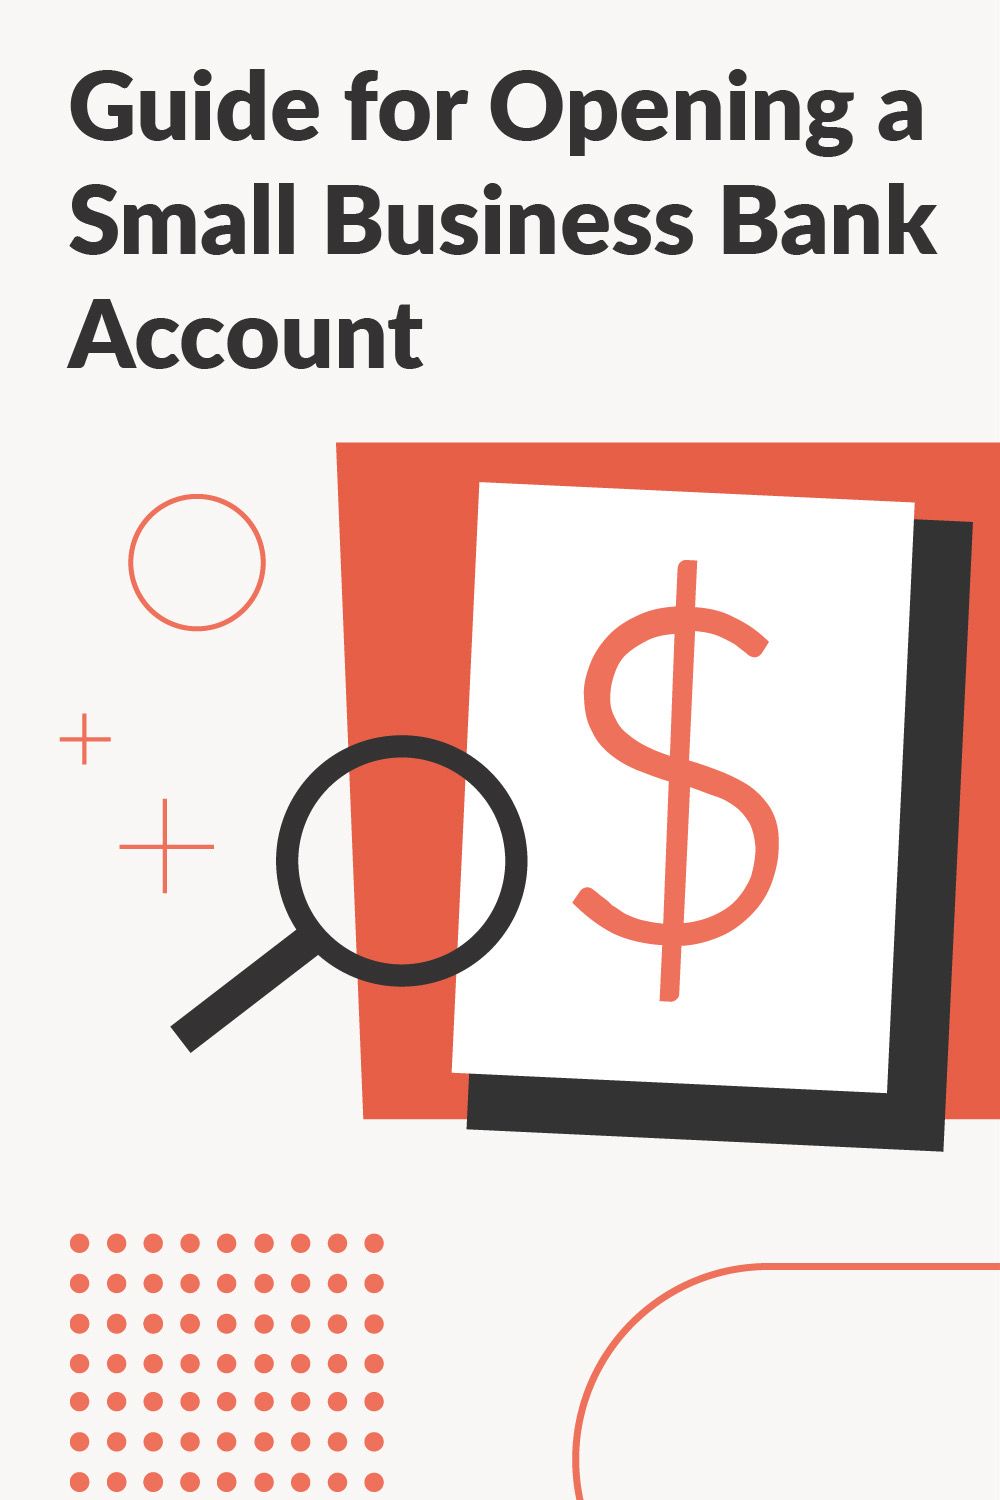 A Guide For Opening A Small Business Bank Account Pinterest Image